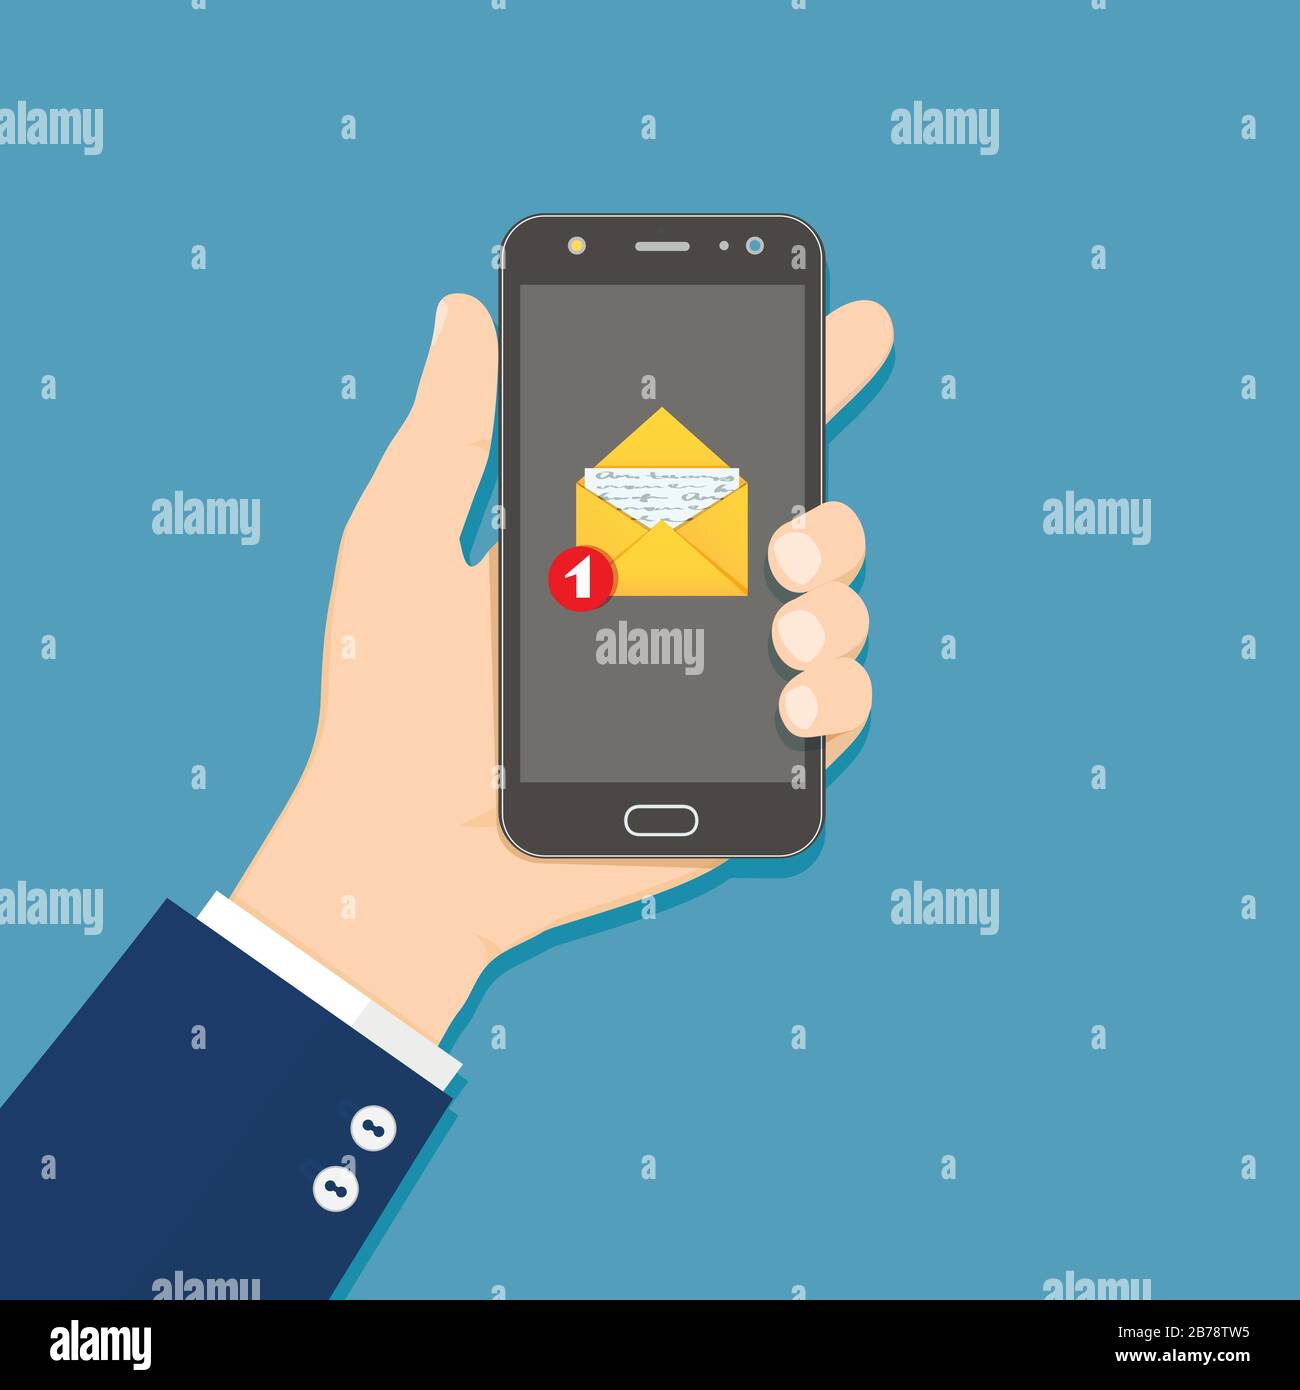 Hand holding smartphone with email icon. Flat style design vector illustration. Stock Vector